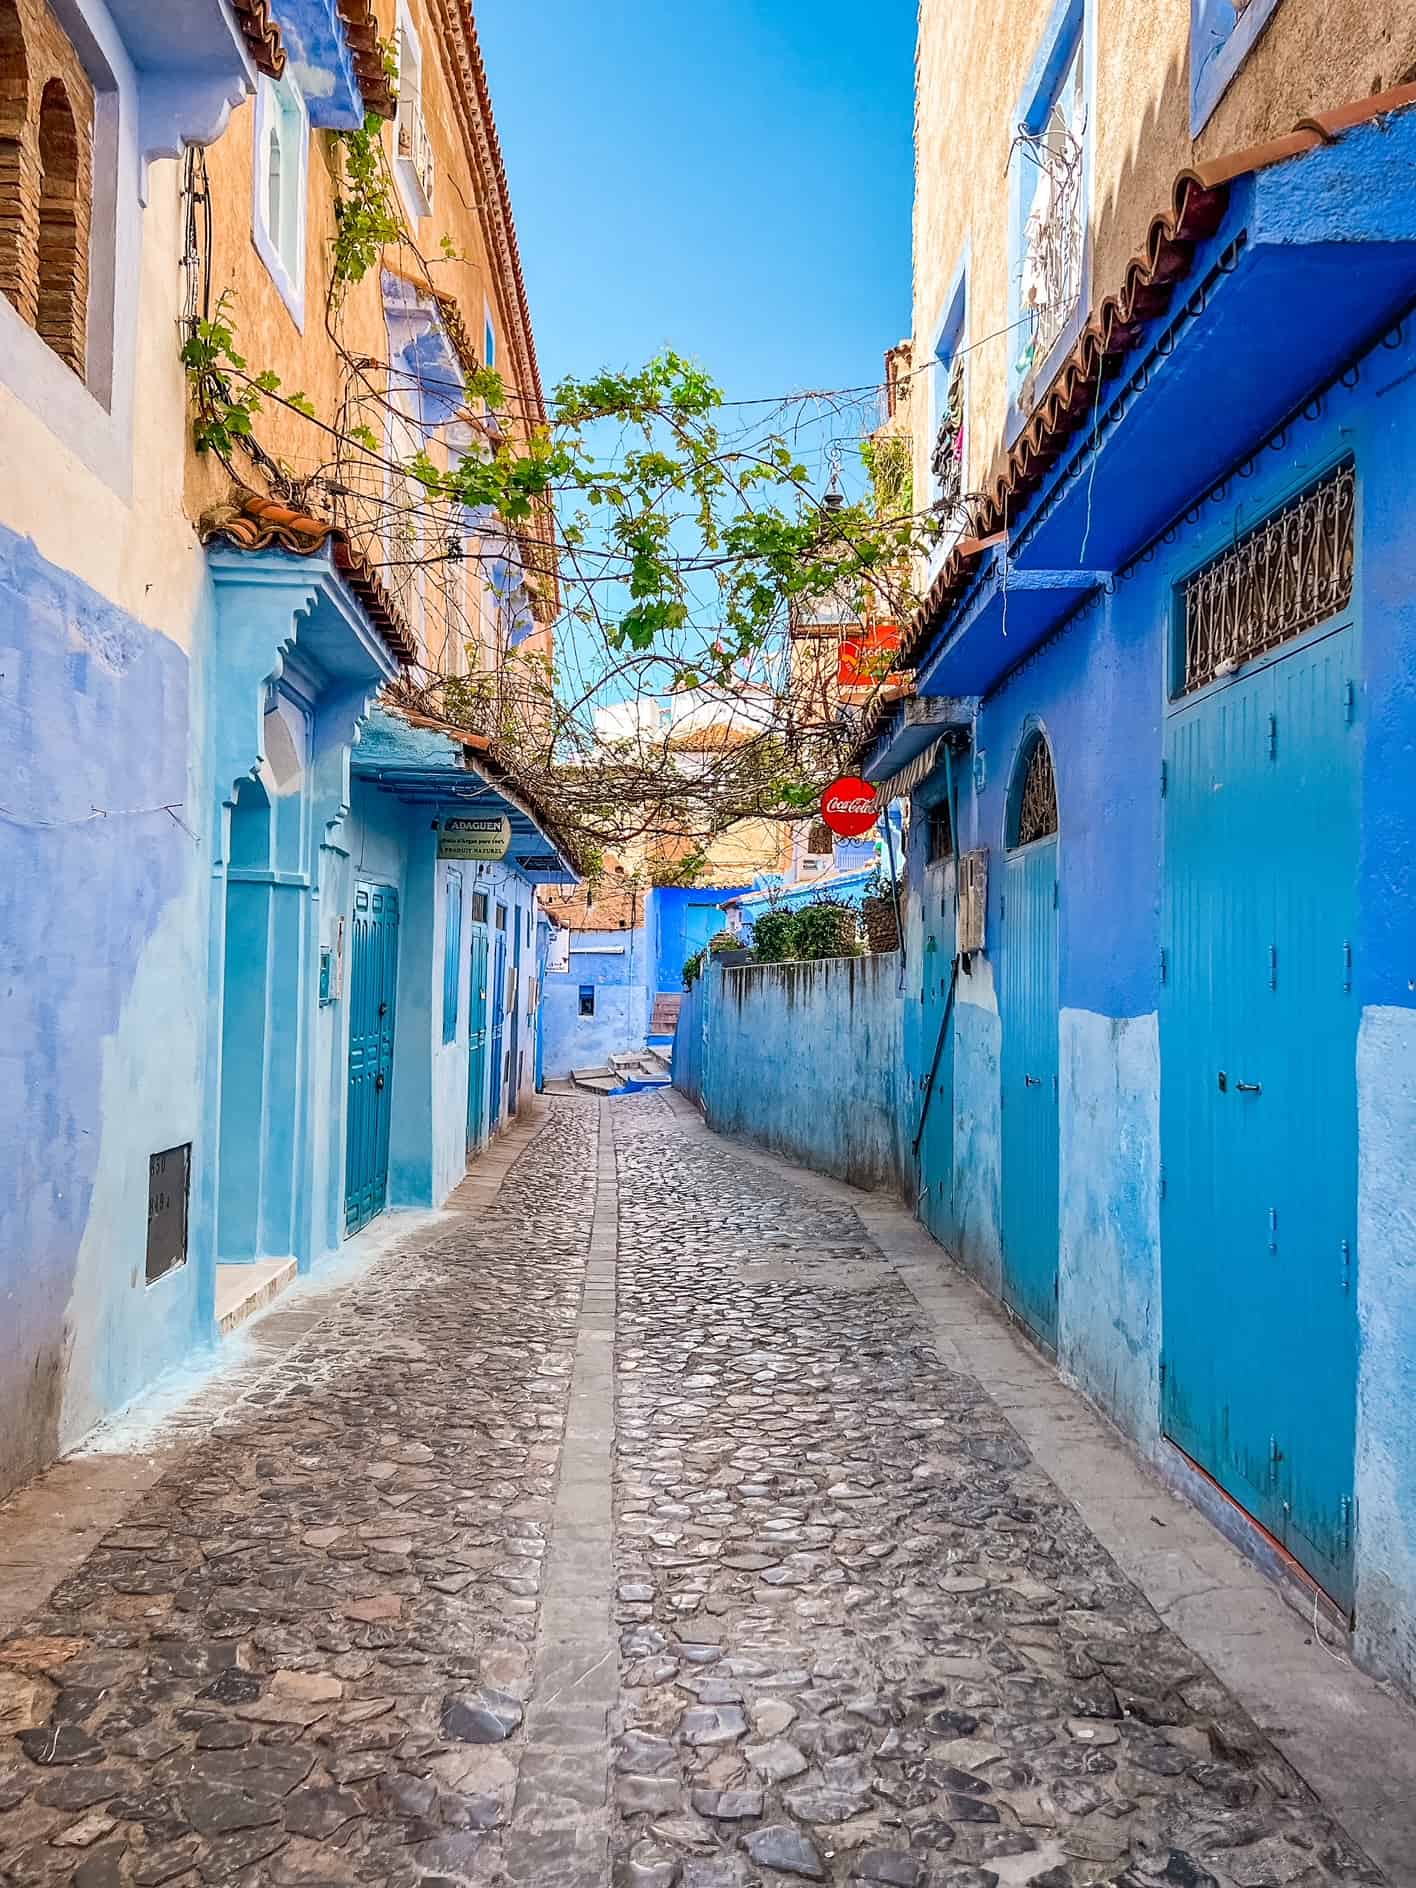 Top 15 Unique Things To Do in Chefchaouen, Morocco | Wanderlust With Lisa